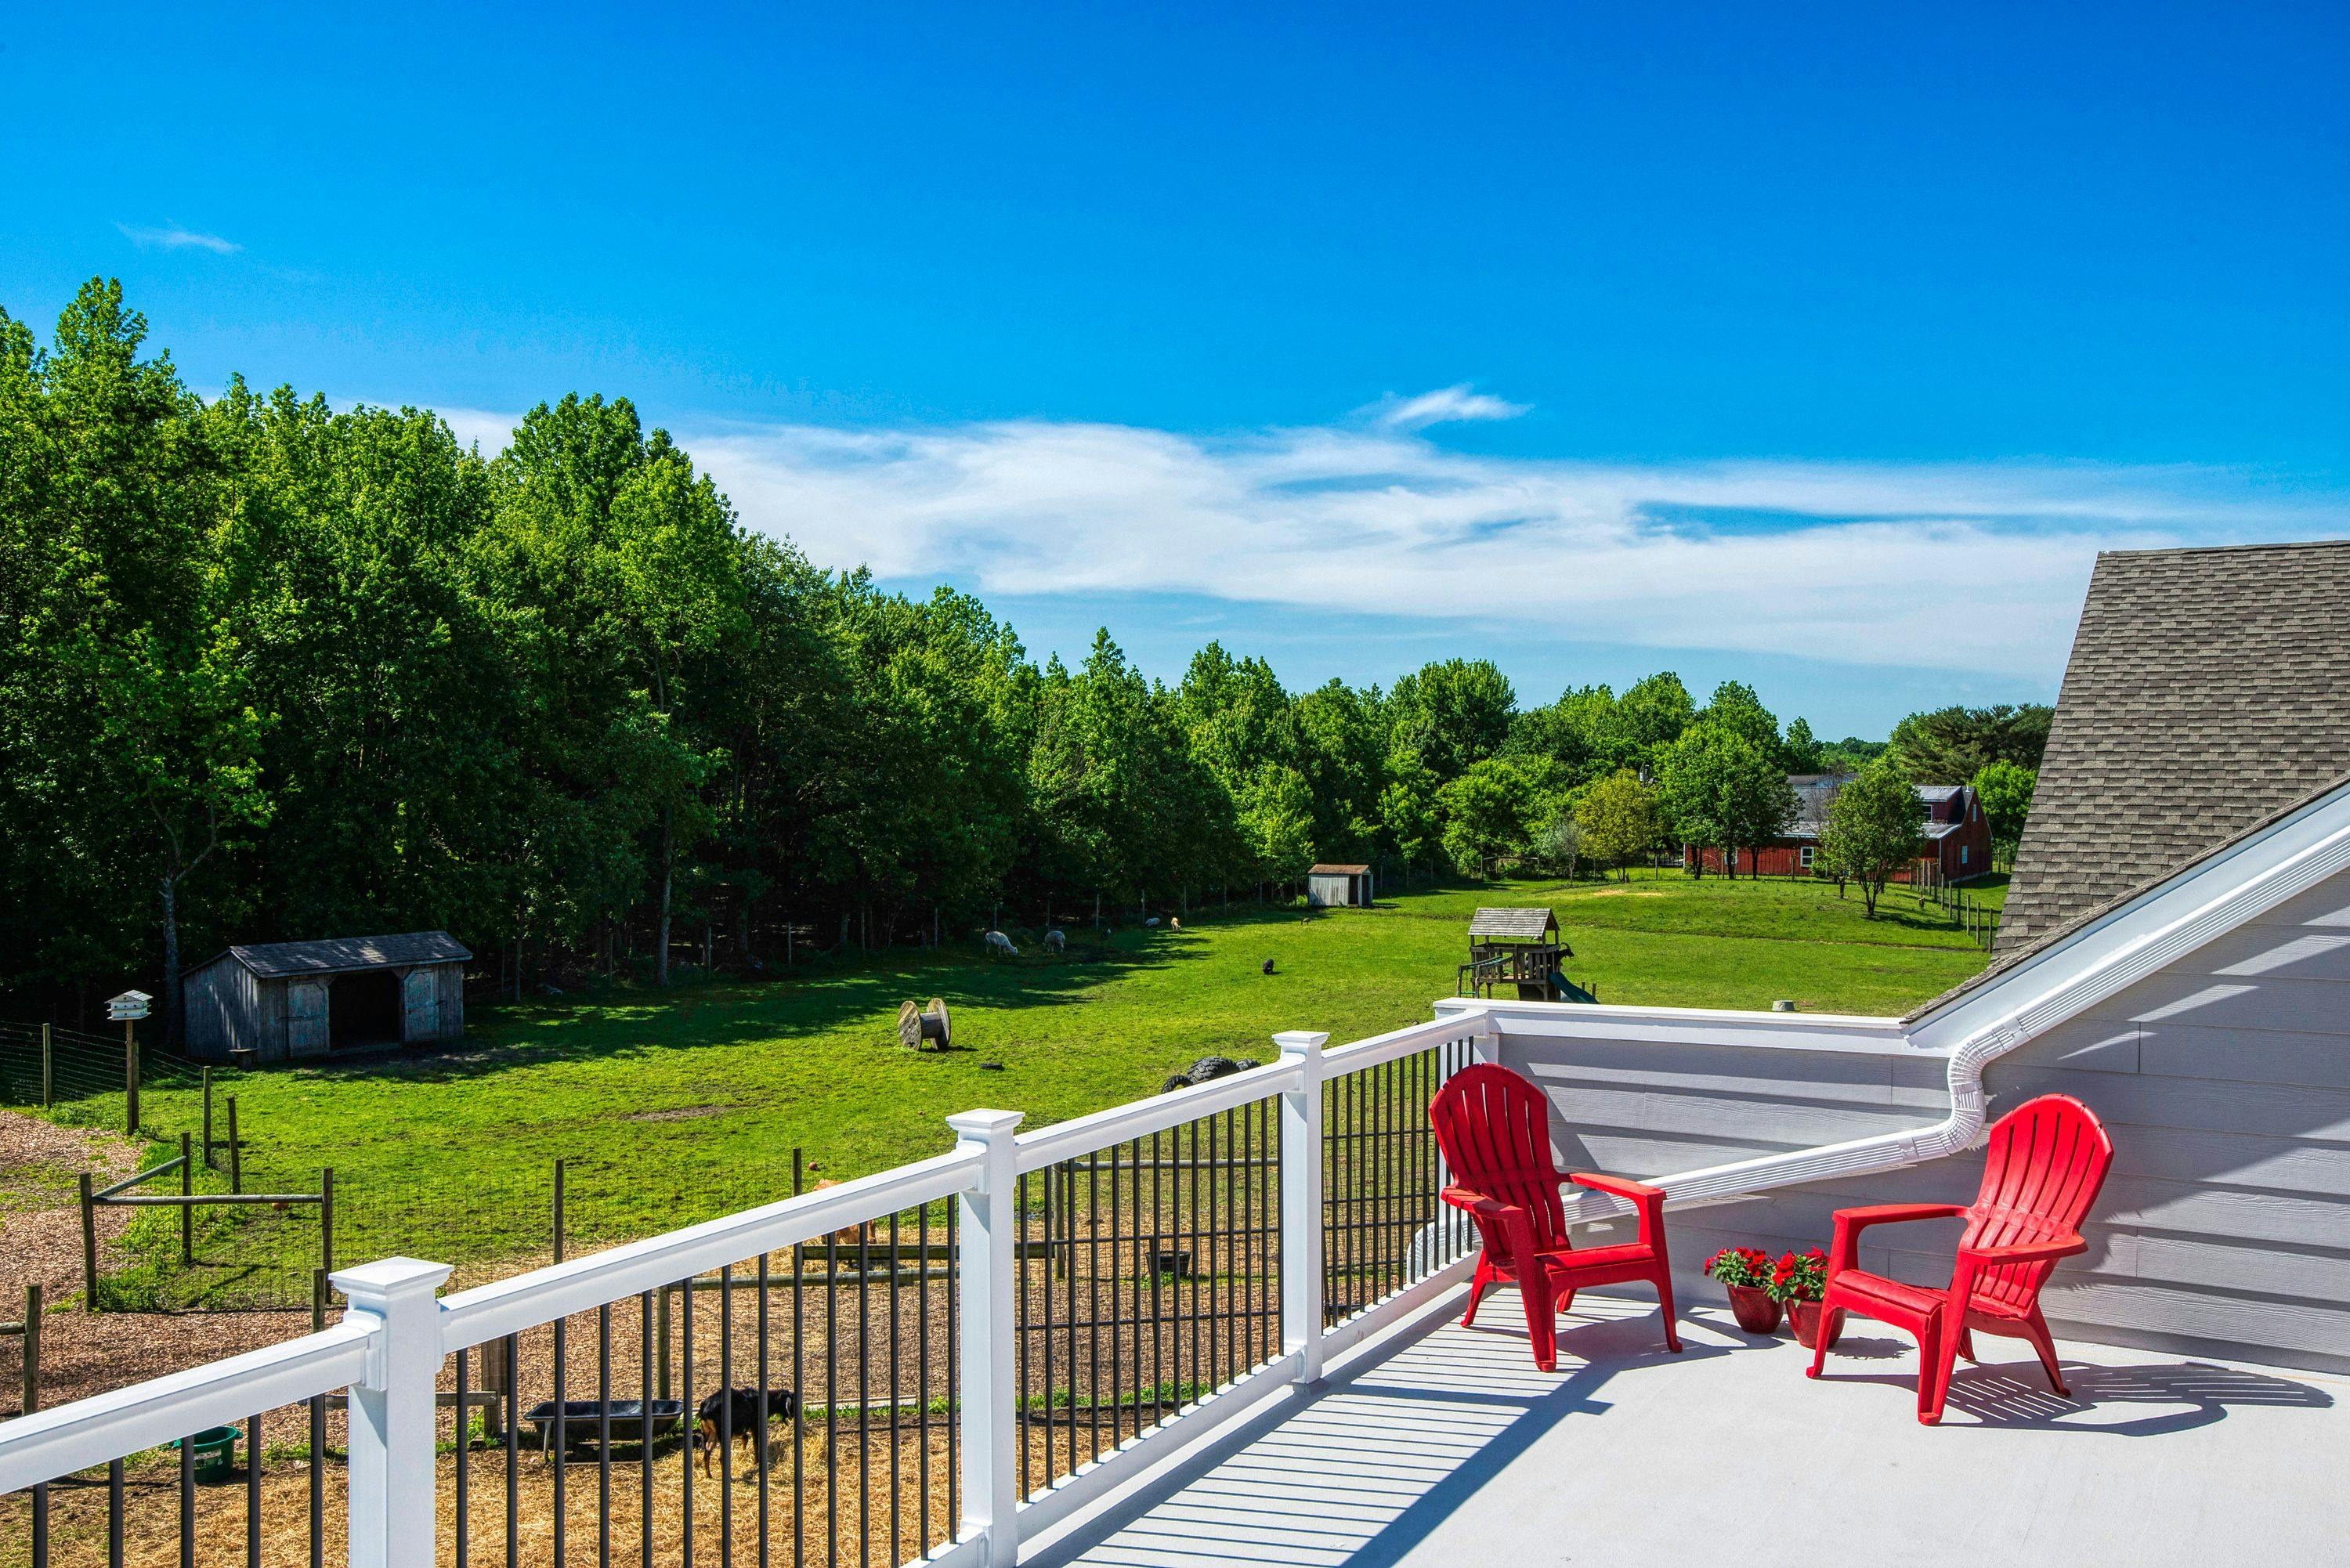 The auditorium and employee lounge open to a large outdoor fiberglass deck, complete with lounge chairs and surround sound, that overlooks the property’s 16 acres of farmland and a serene pond.